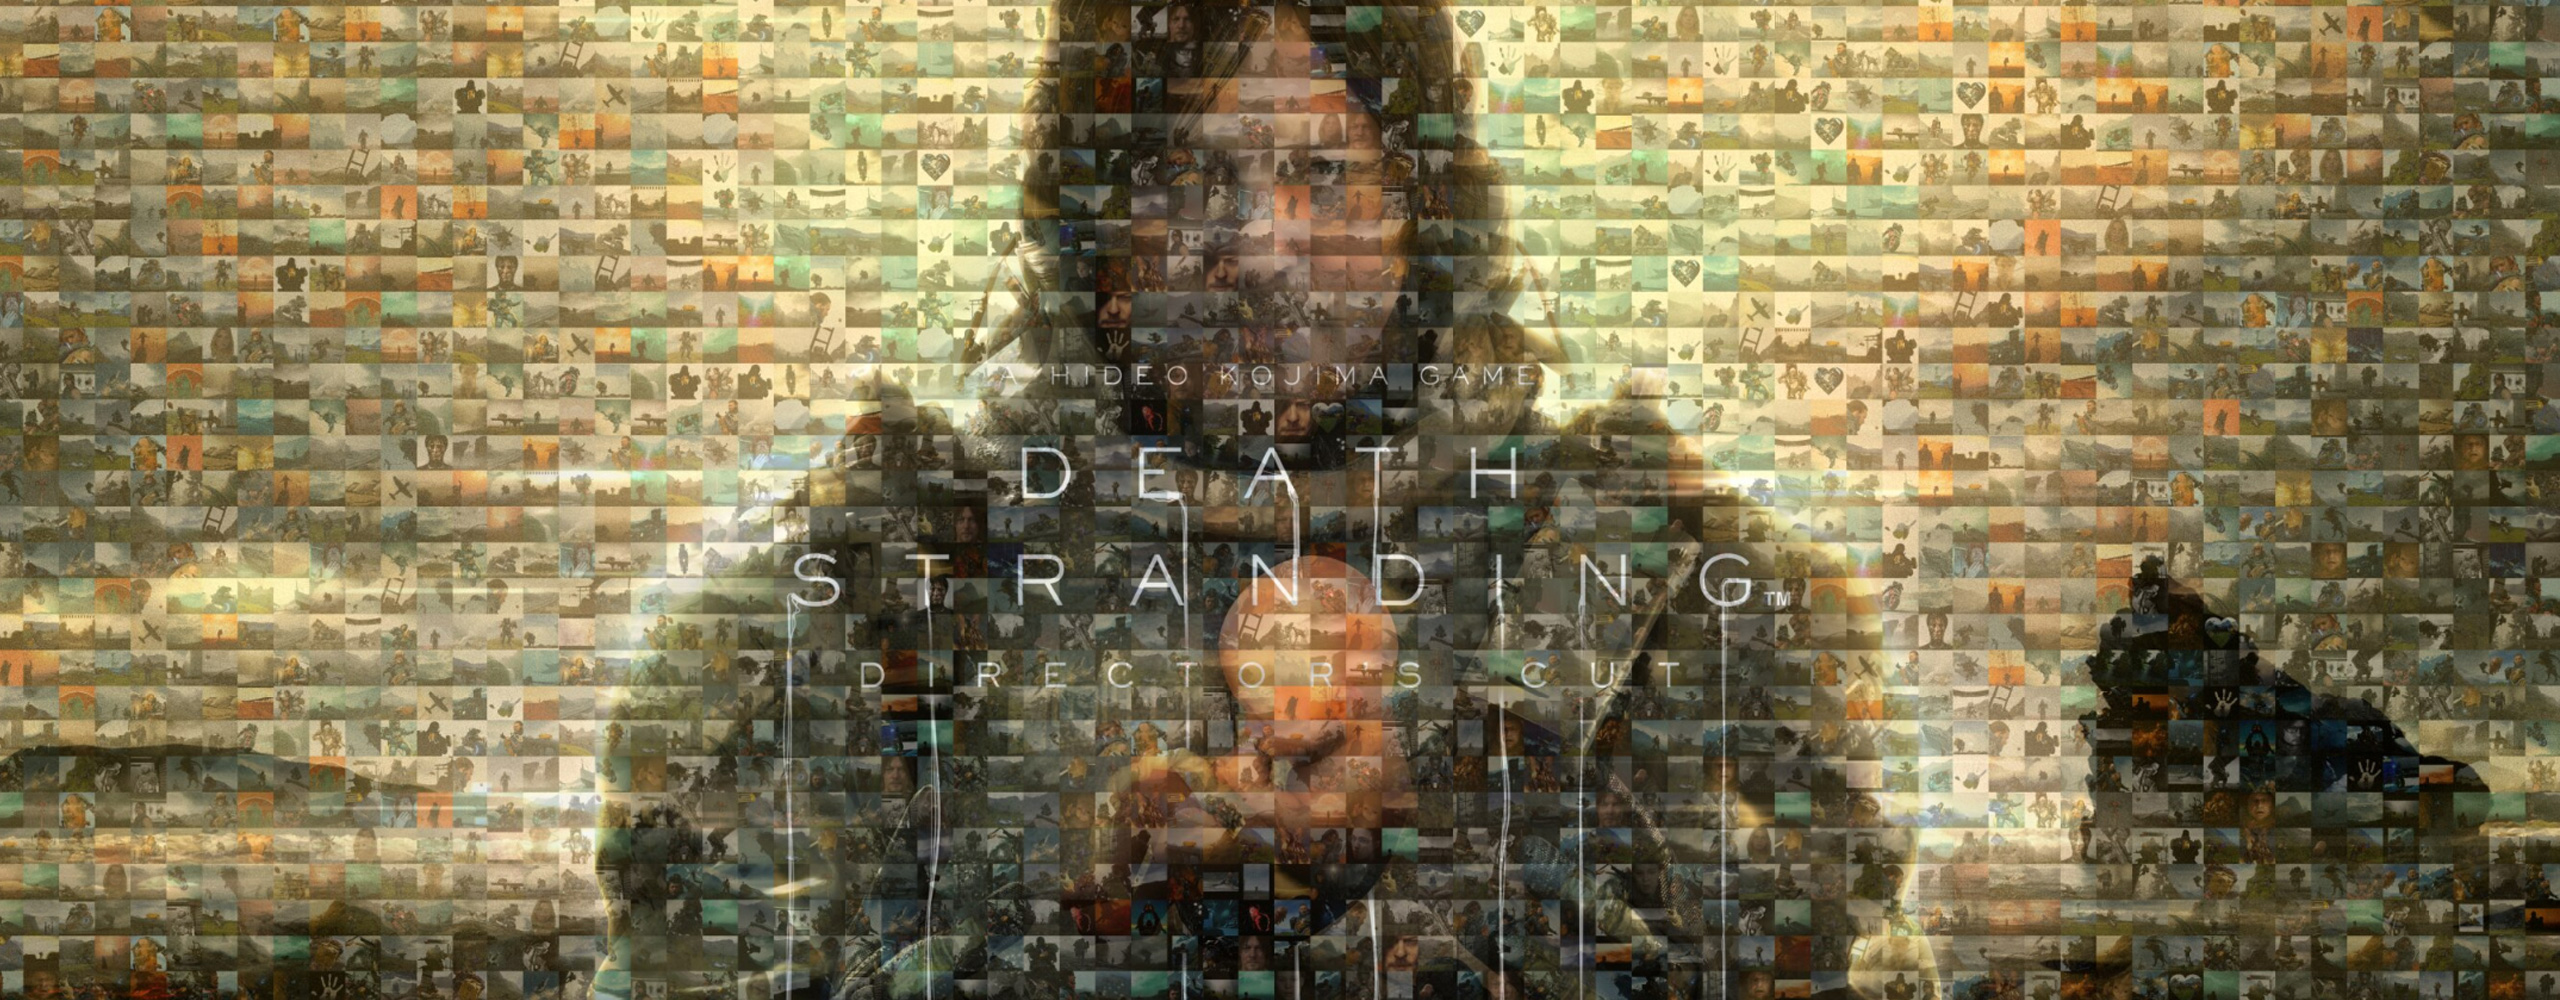 CELEBRATING 2 YEARS OF DEATH STRANDING ON PC